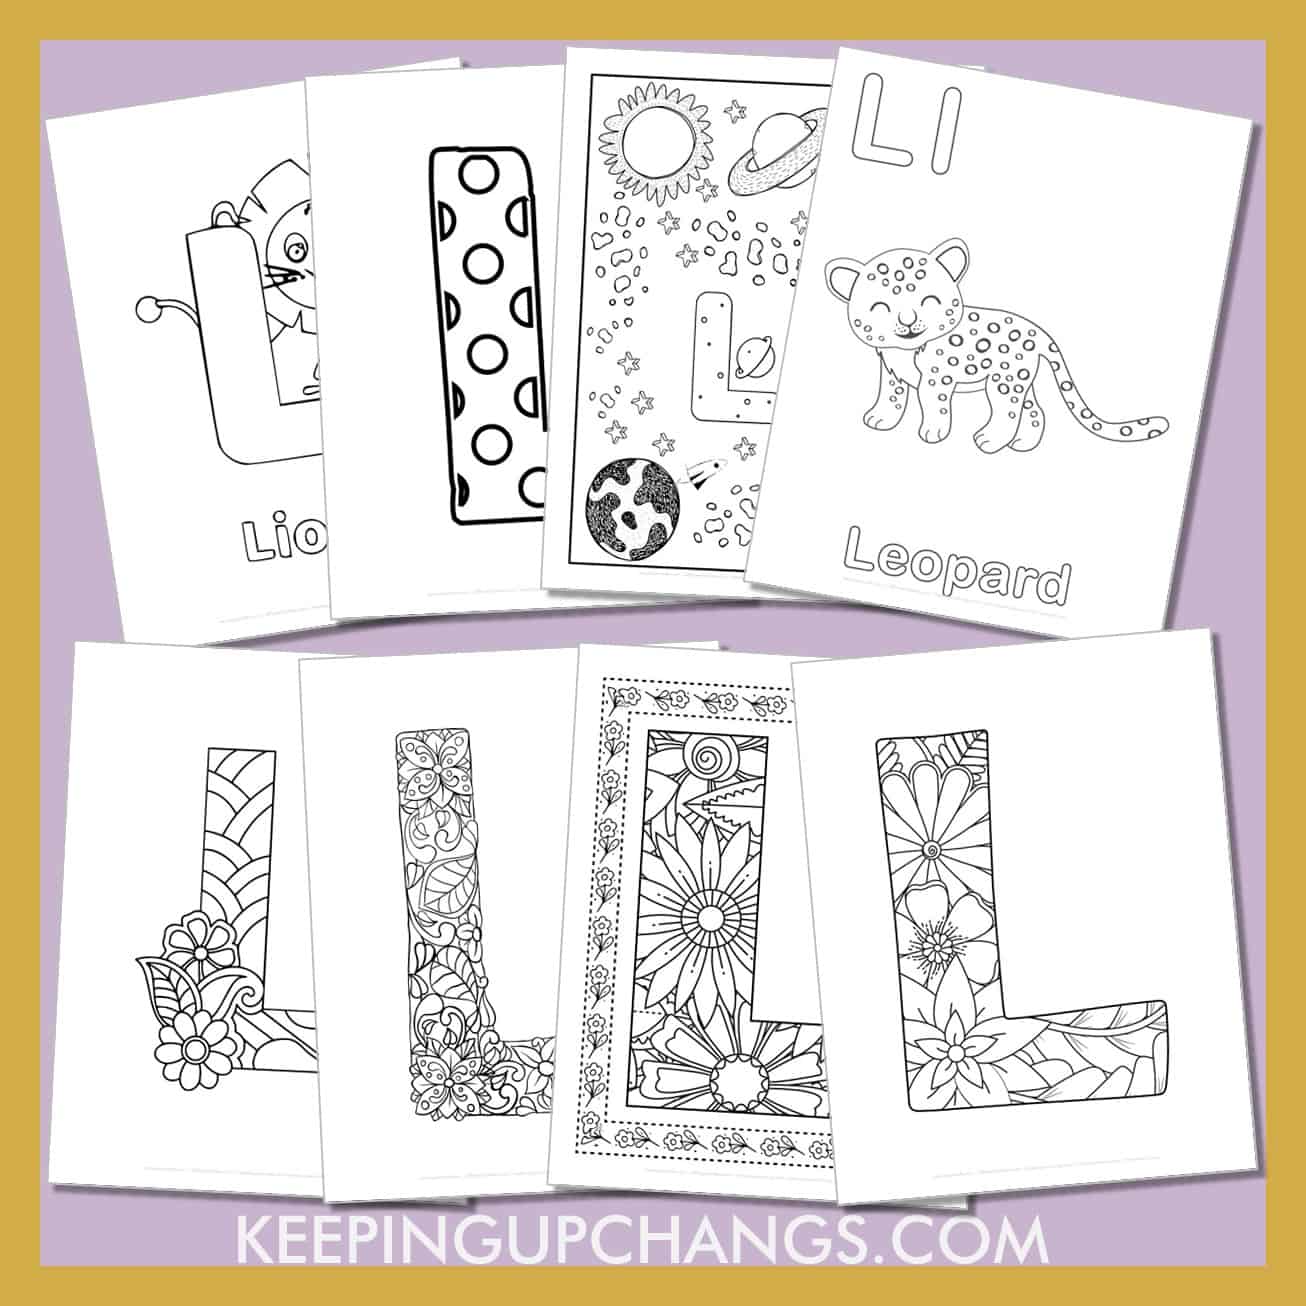 free alphabet letter l to color for toddlers, preschool, kindergarten, to adults.